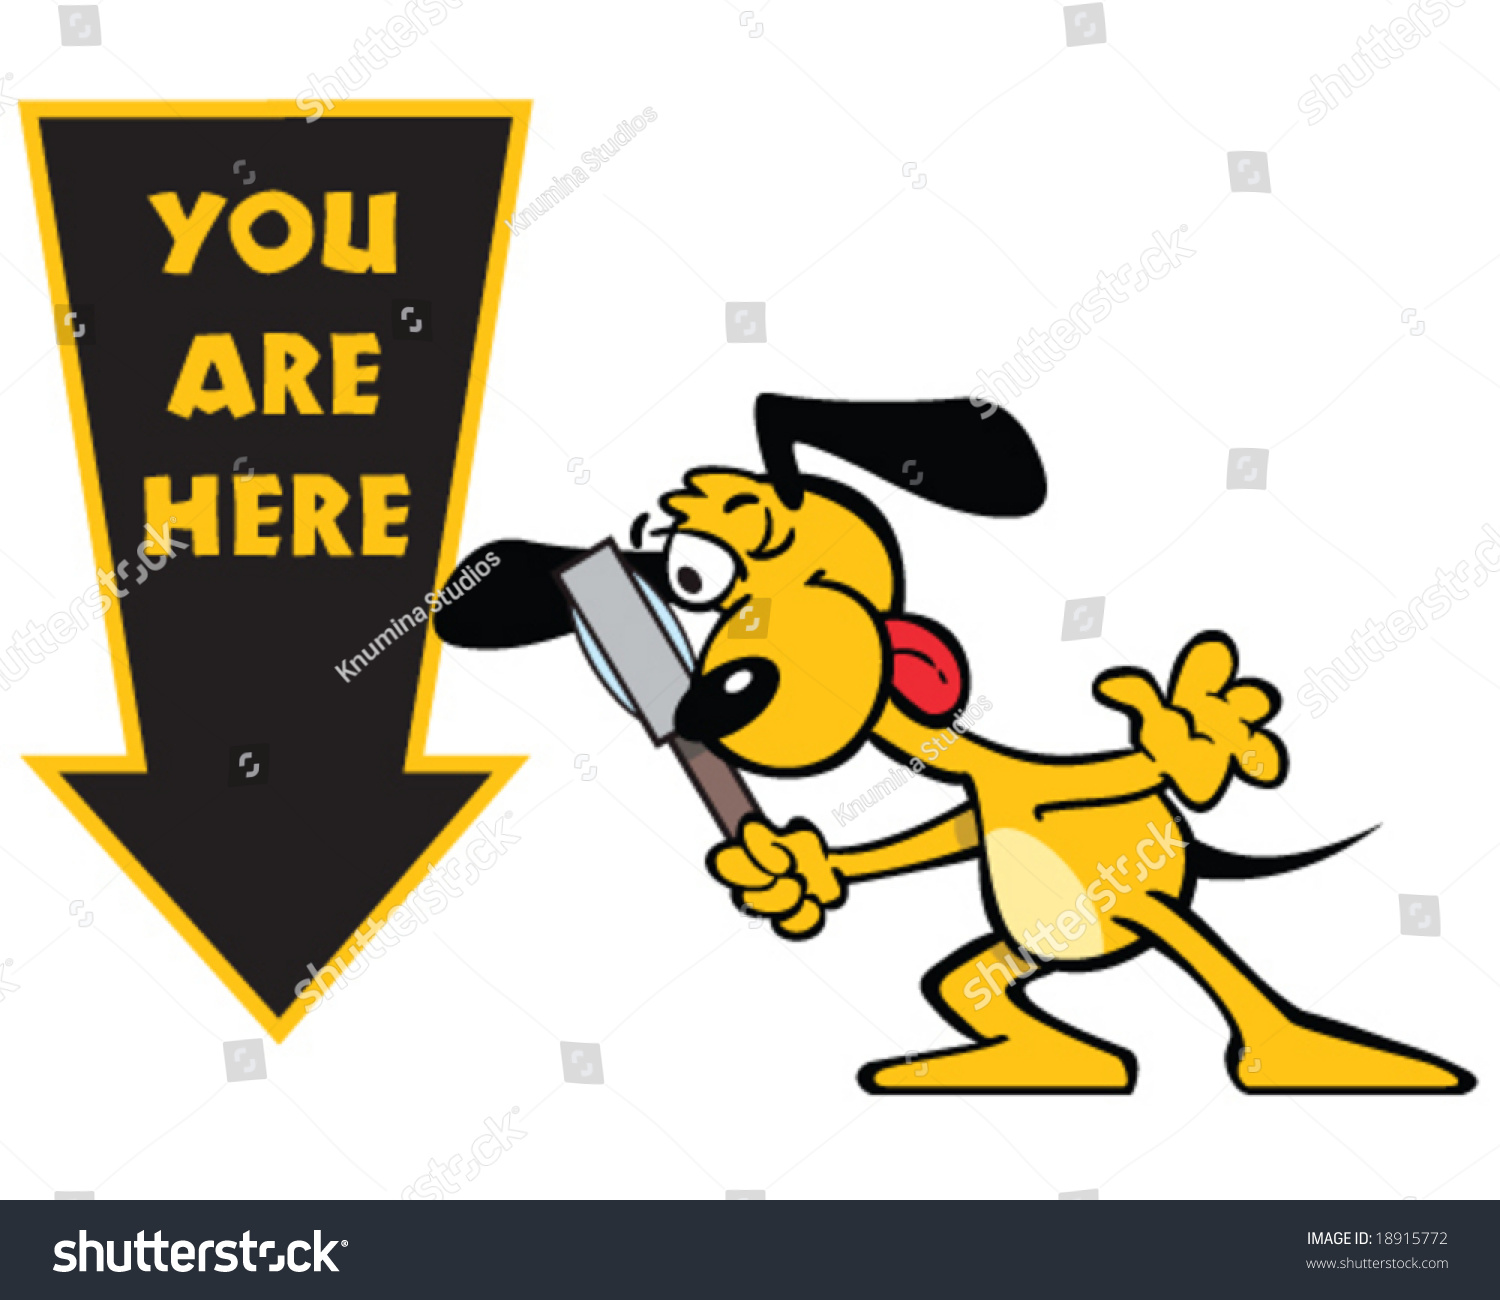 clip art you are here - photo #16